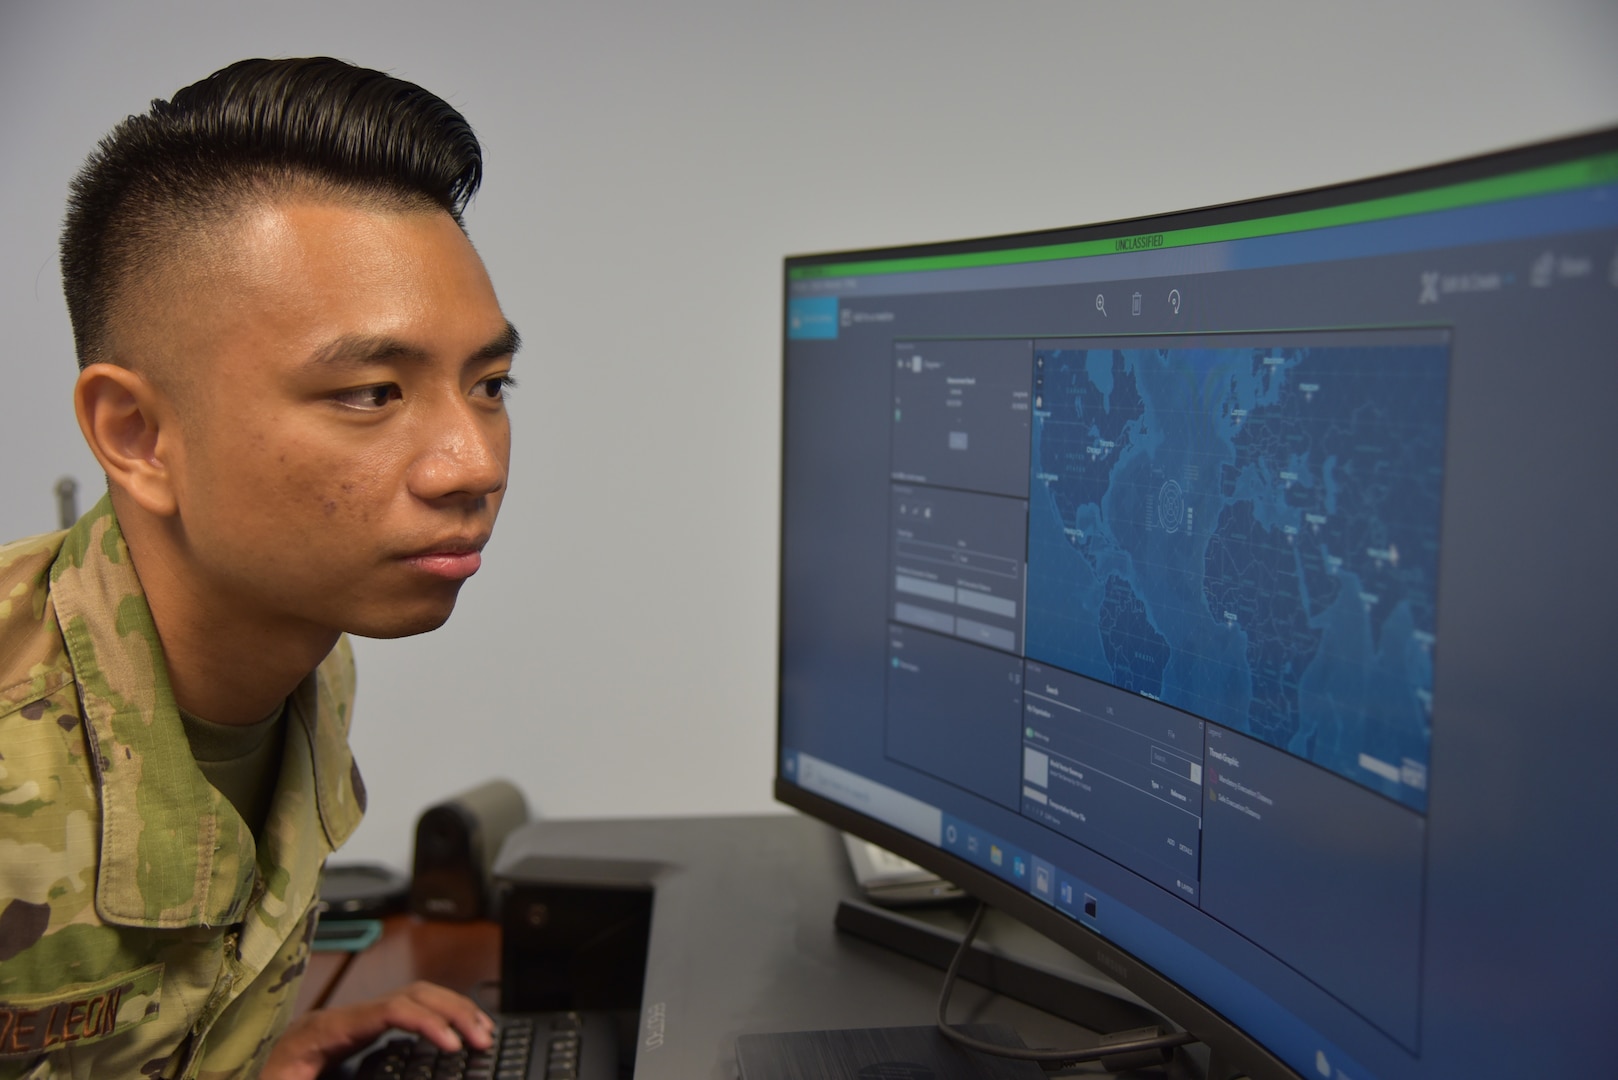 Staff Sgt. Steven De Leon views an unclassified version of a geospatial web application depicting the measurement tool and threat analysis feature of the Phoenix Oracle website. The New Jersey Air National Guardsman is an intelligence analyst with the 204th Intelligence Squadron at Joint Base McGuire-Dix-Lakehurst and has been named the chief lead of the team developing this Air Mobility Command-led web capability project.